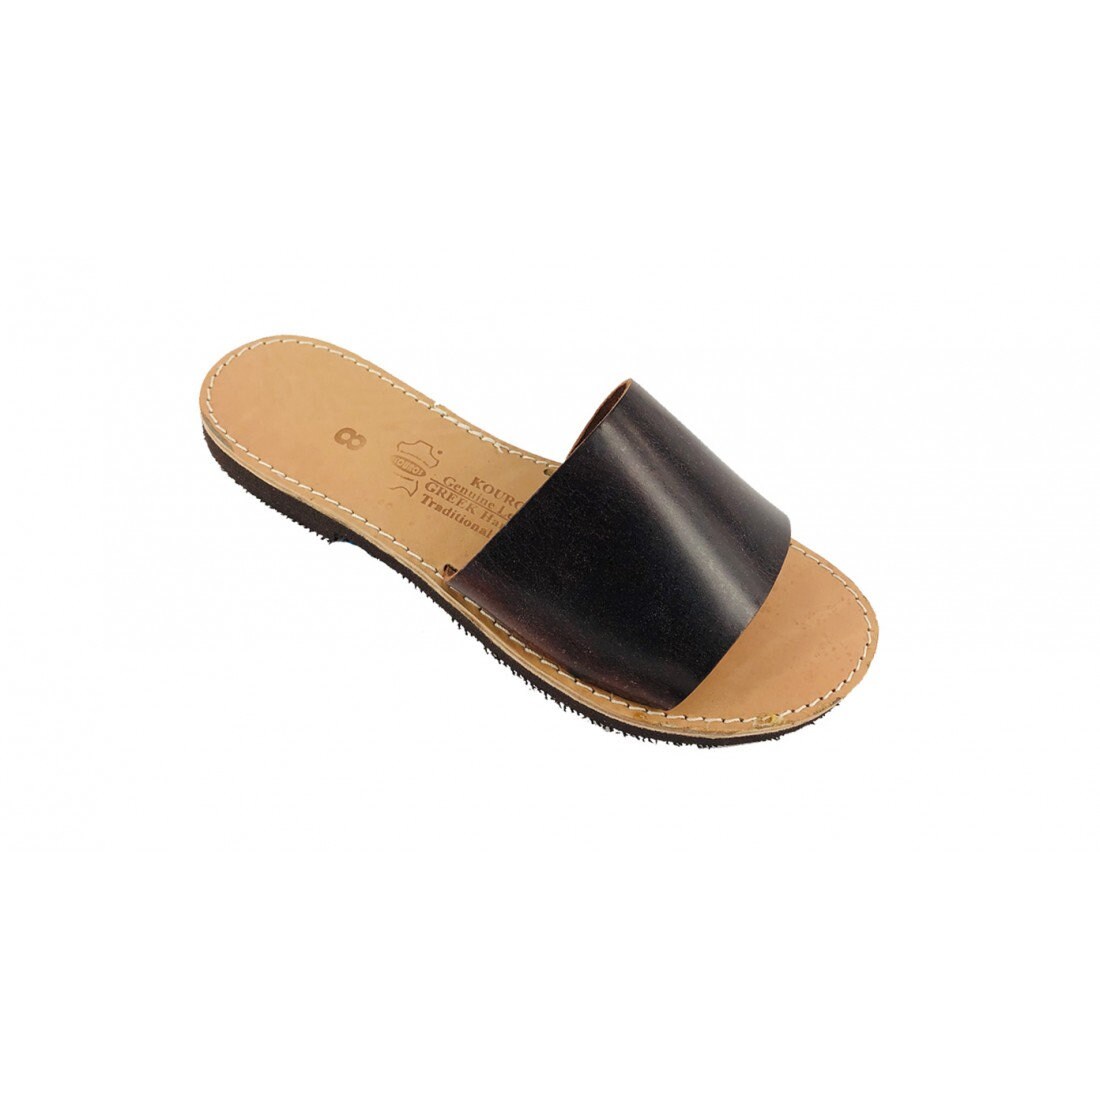 Slide Greek leather sandals, leather slippers women, Flat black leather sandals, Sandales grecques cuir